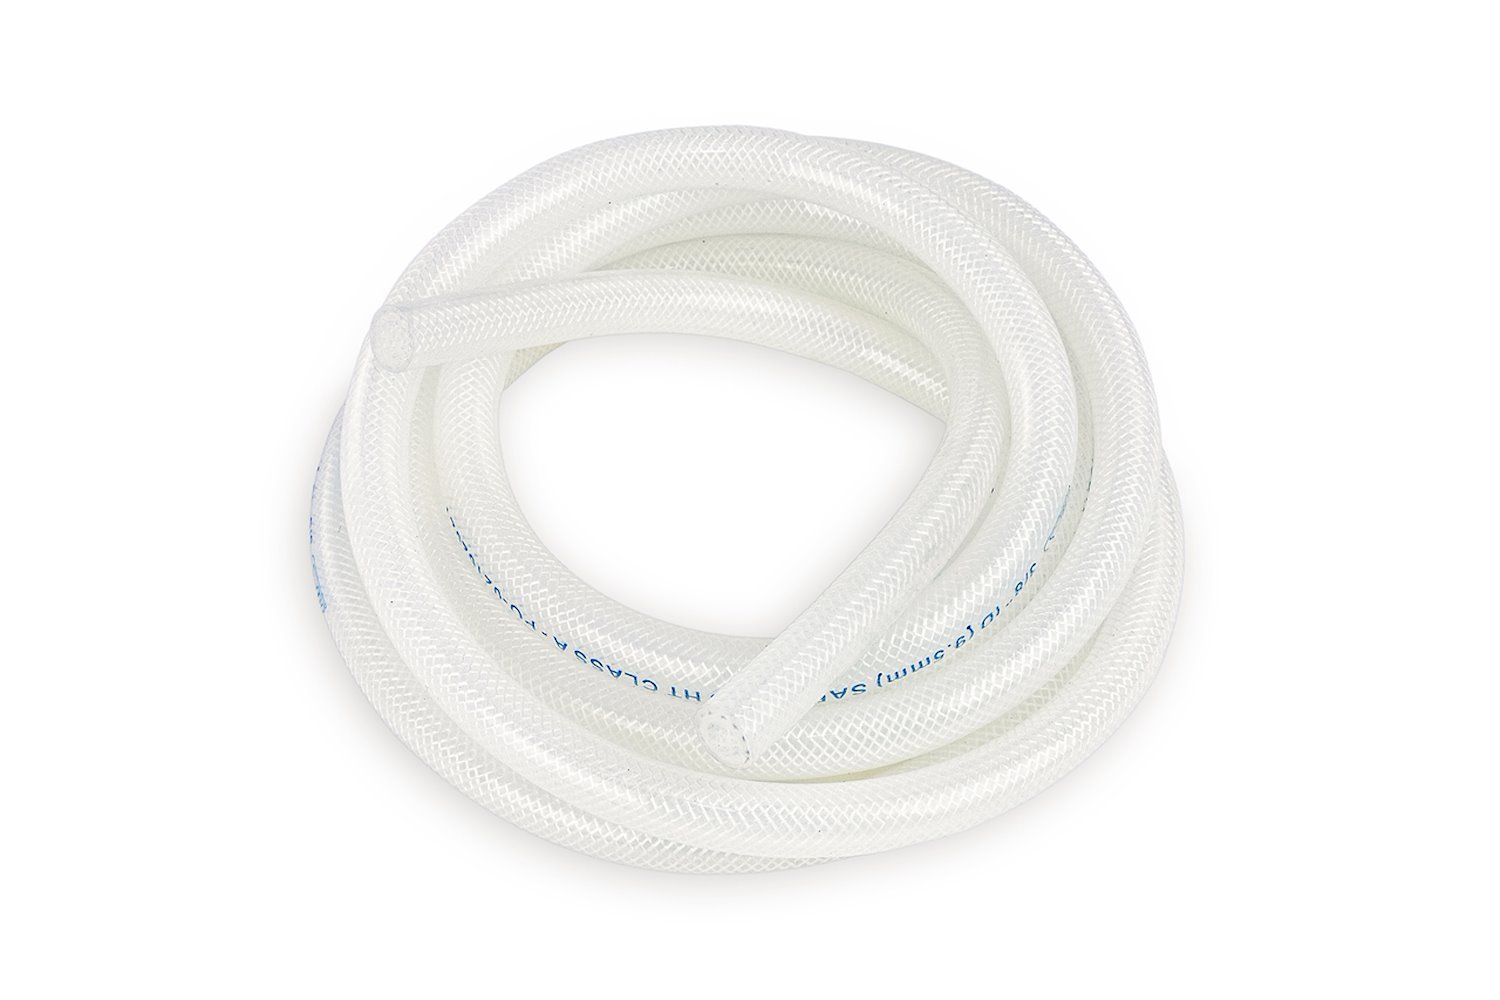 HTHH-032-CLEARx10 Silicone Heater Hose Tubing, High-Temp Reinforced, 5/16 in. ID, 10 ft. Roll, Clear